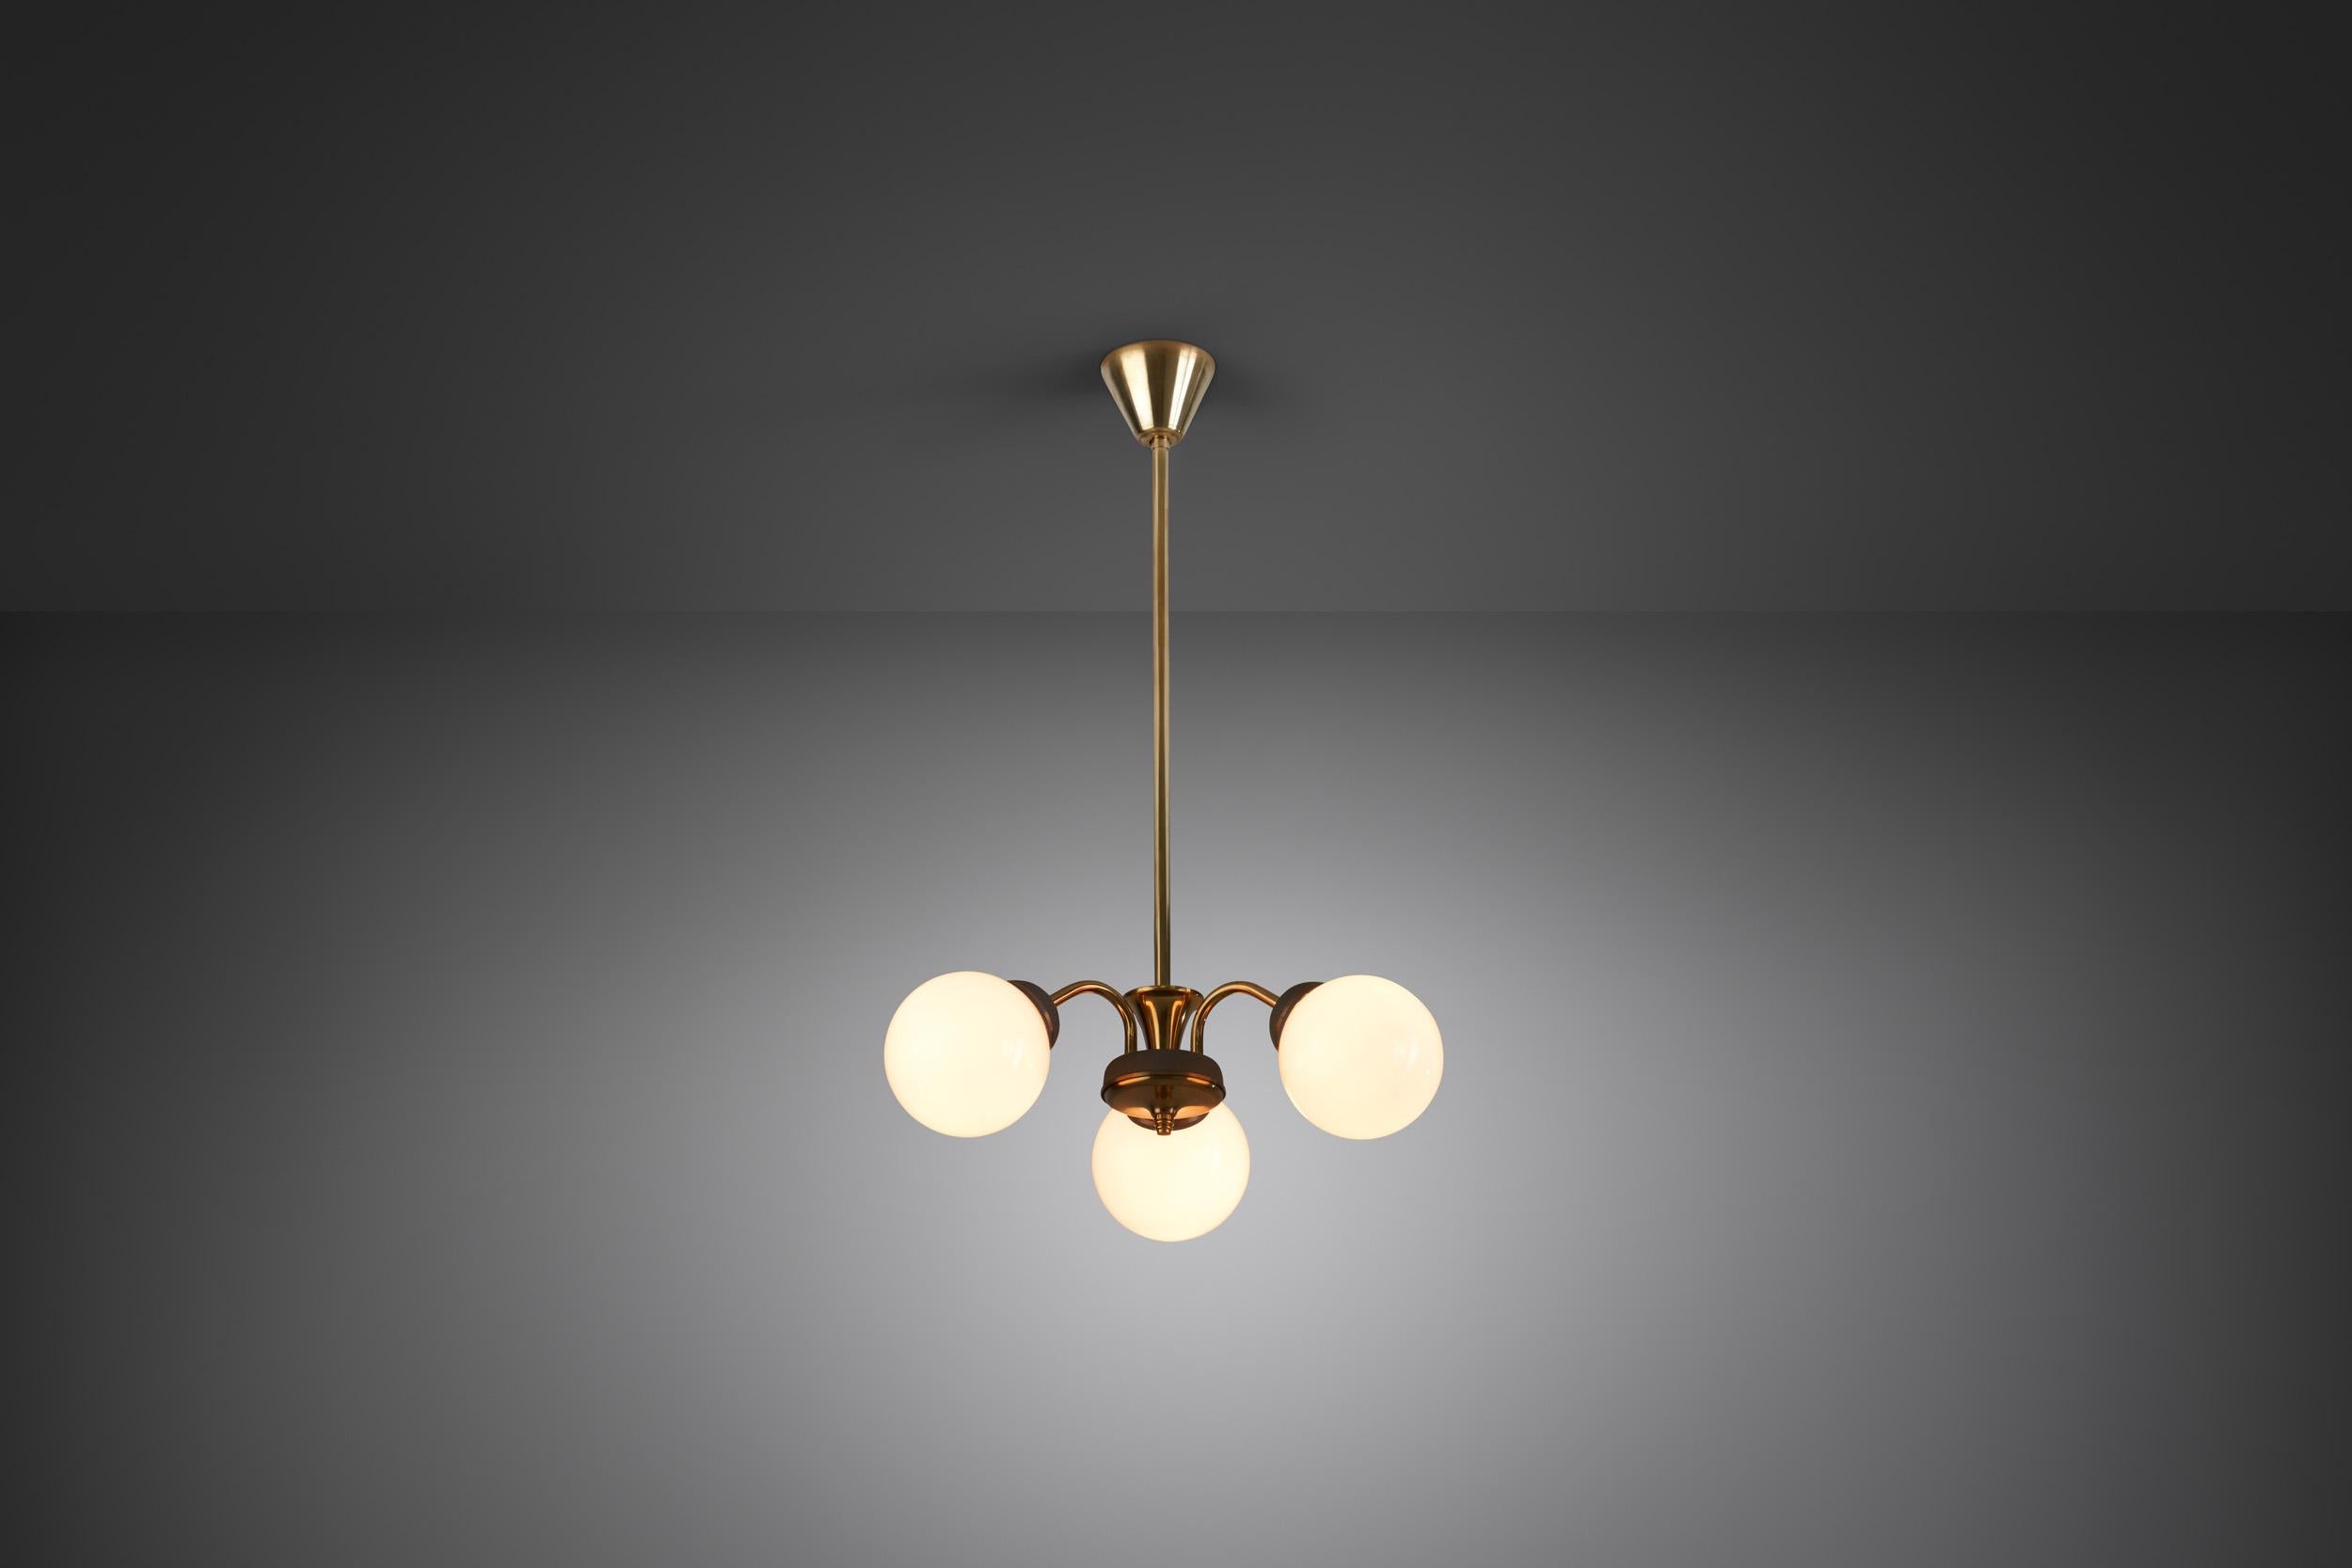 Mid-20th Century Brass Three-Armed Ceiling Lamp with Opal Glass Shades, Scandinavia 1950s